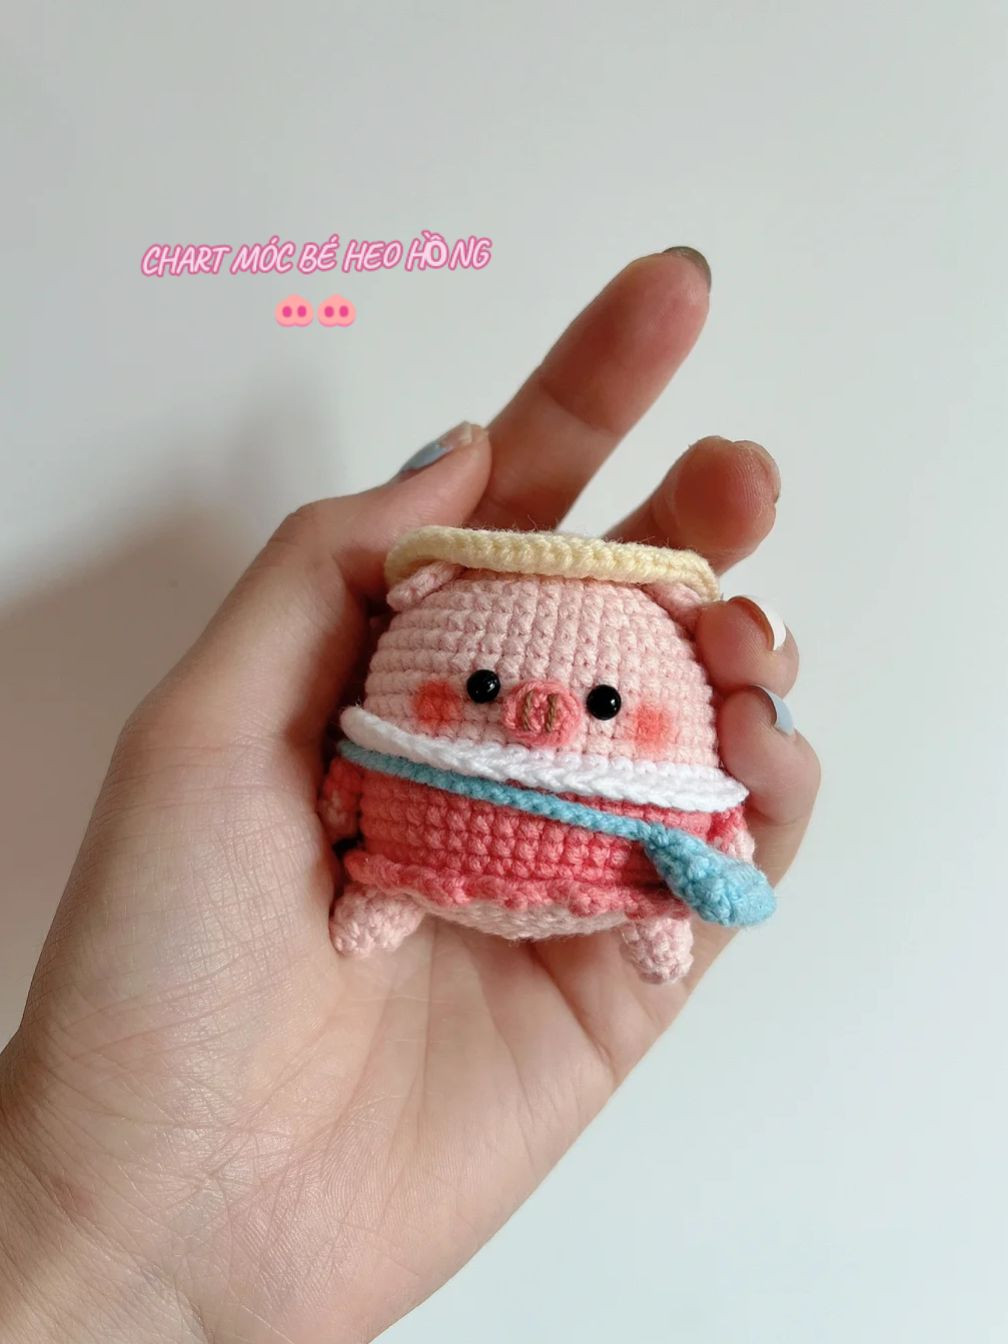 Crochet pattern for a pink pig wearing a hat and a crossbody bag